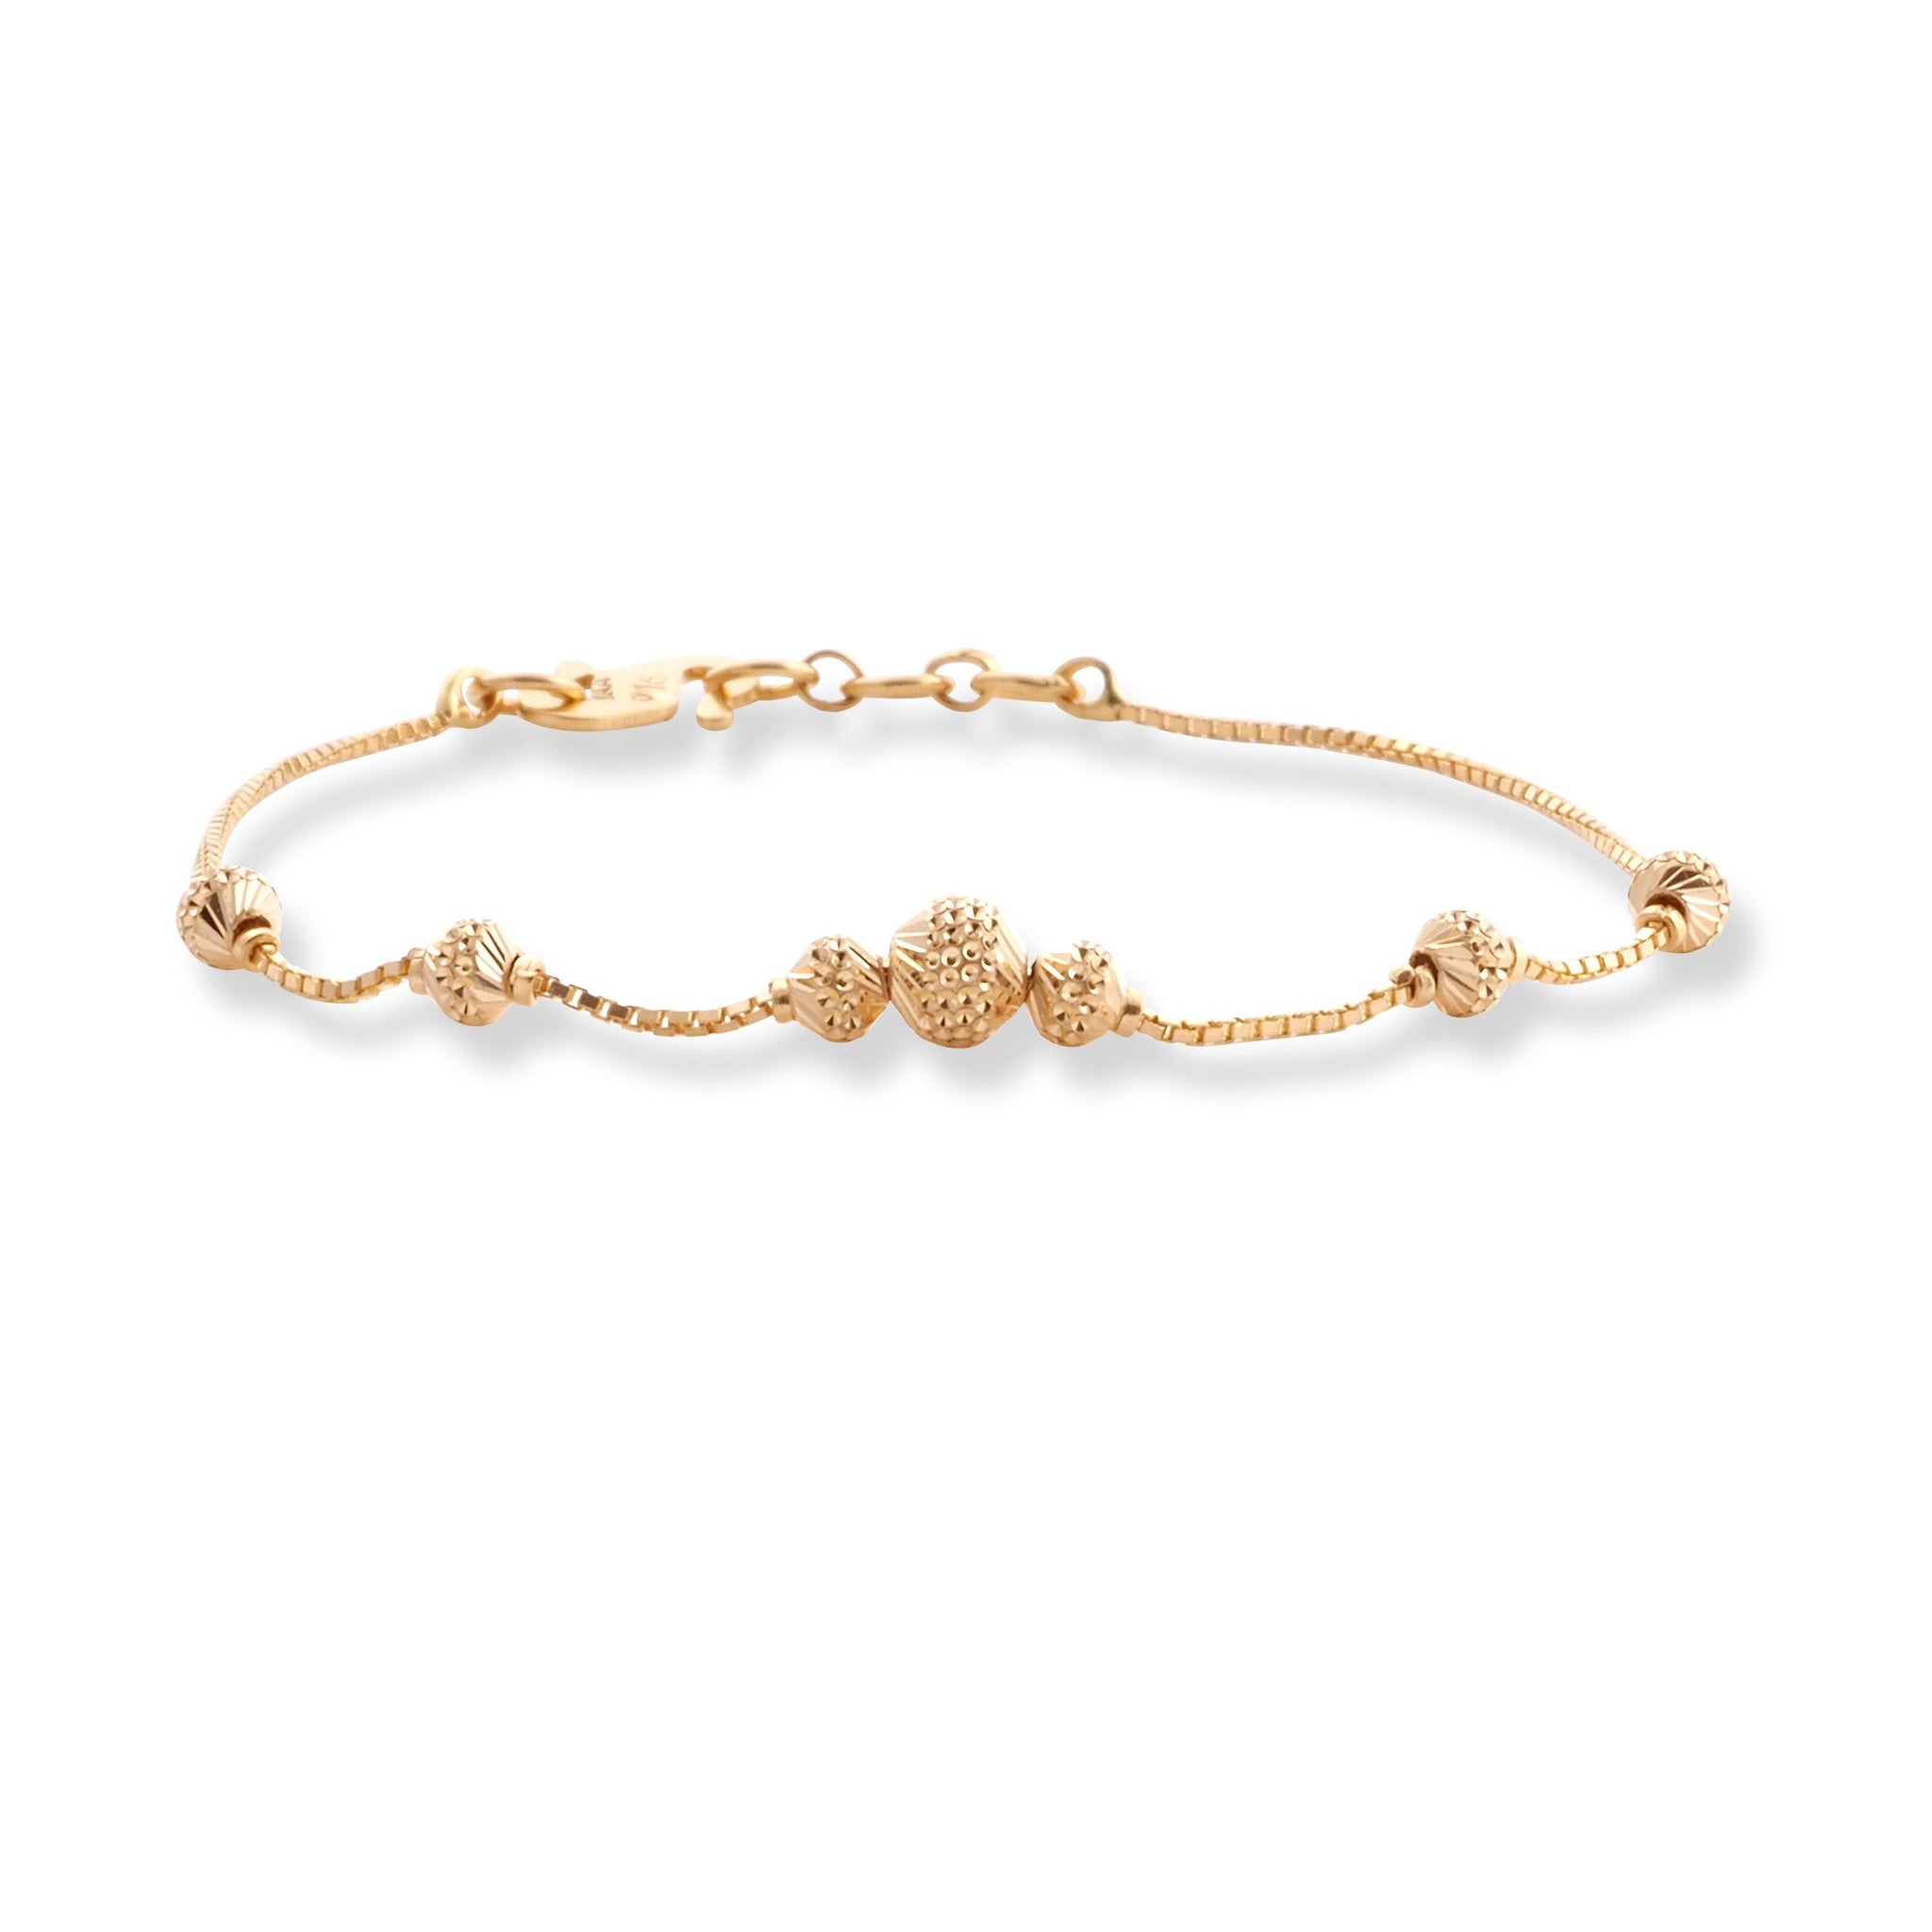 22ct Yellow Gold Bracelet in Diamond Cutting Beads Design with ''S'' Clasp LBR-8508